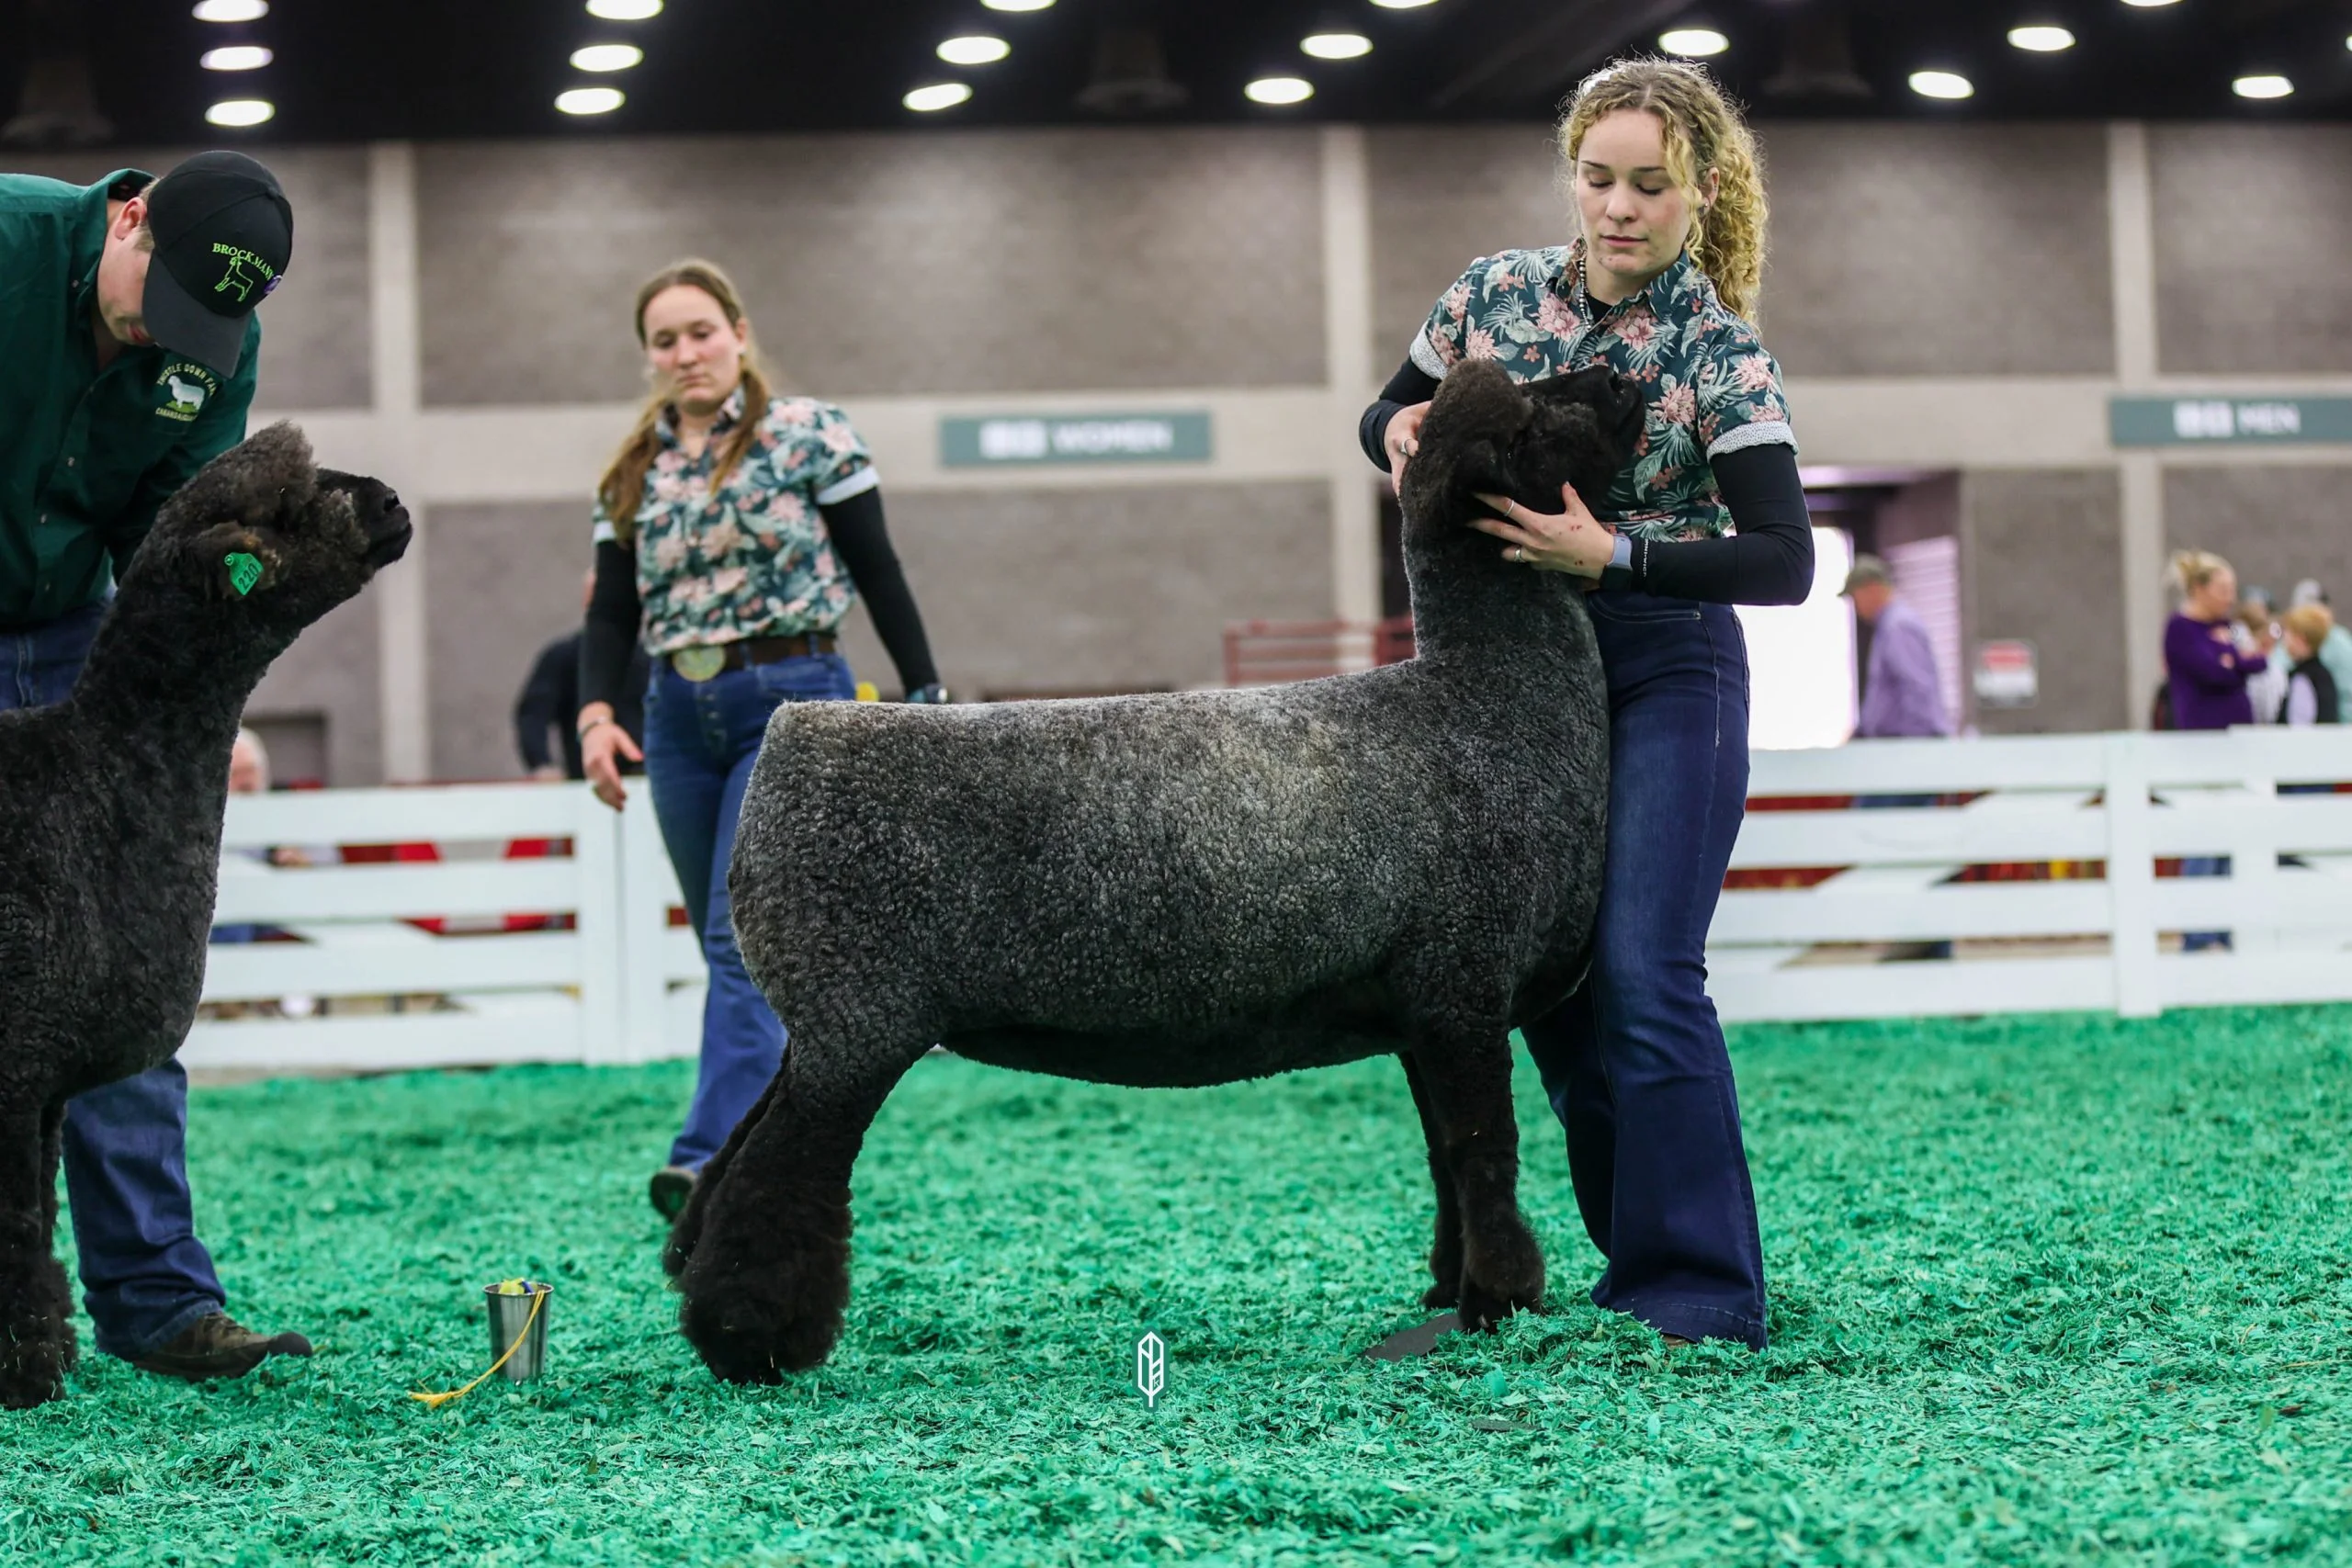 2023 National Natural Colored Romney Show at NAILE
1st place yearling ewe exhibited by Teresa Hromis of Winding Wicks Farm